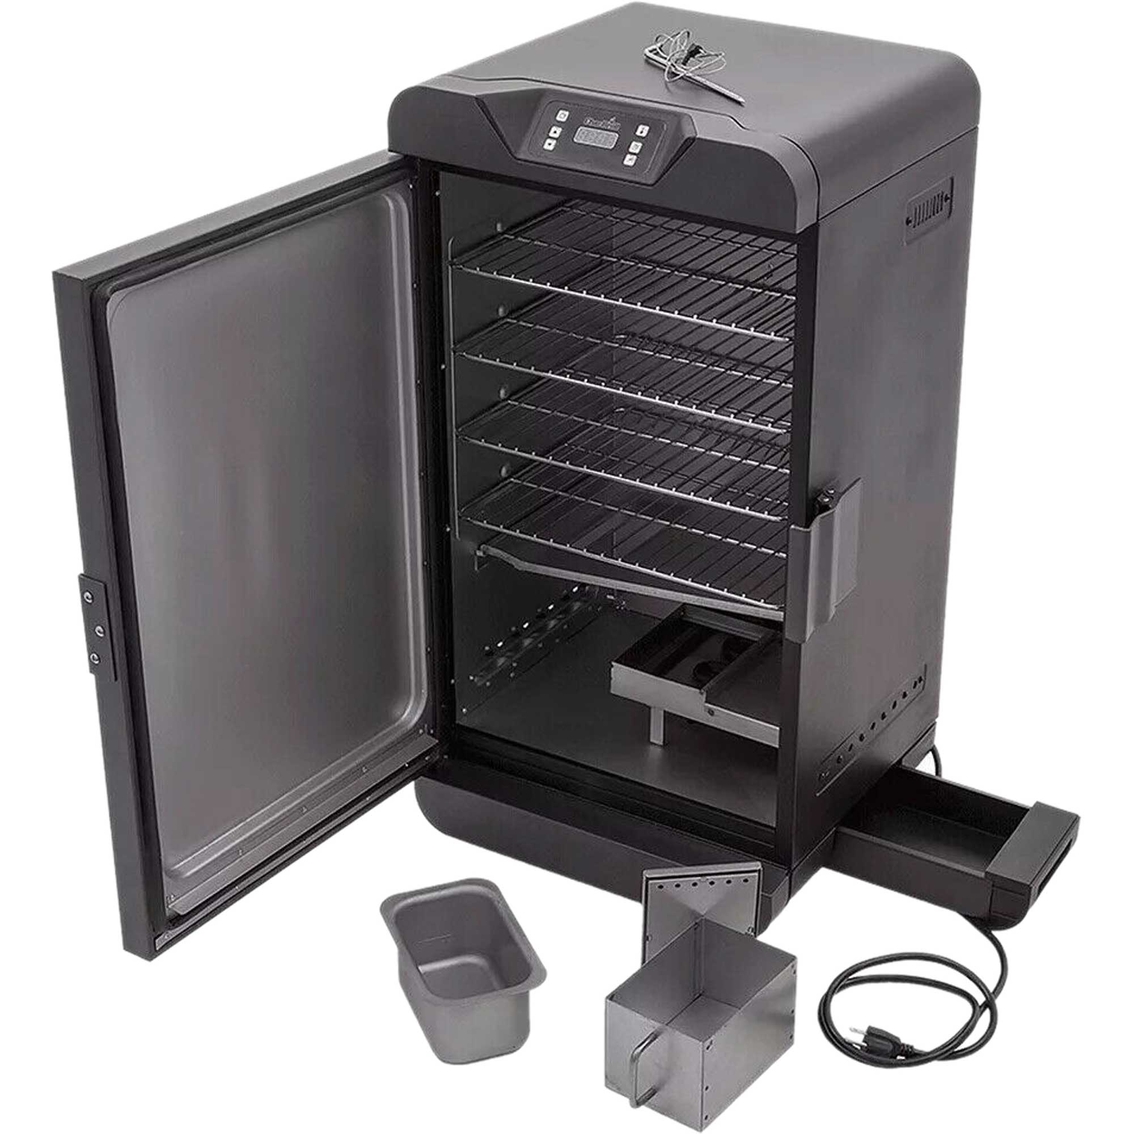 Char-Broil Digital Electric Smoker - Image 3 of 4